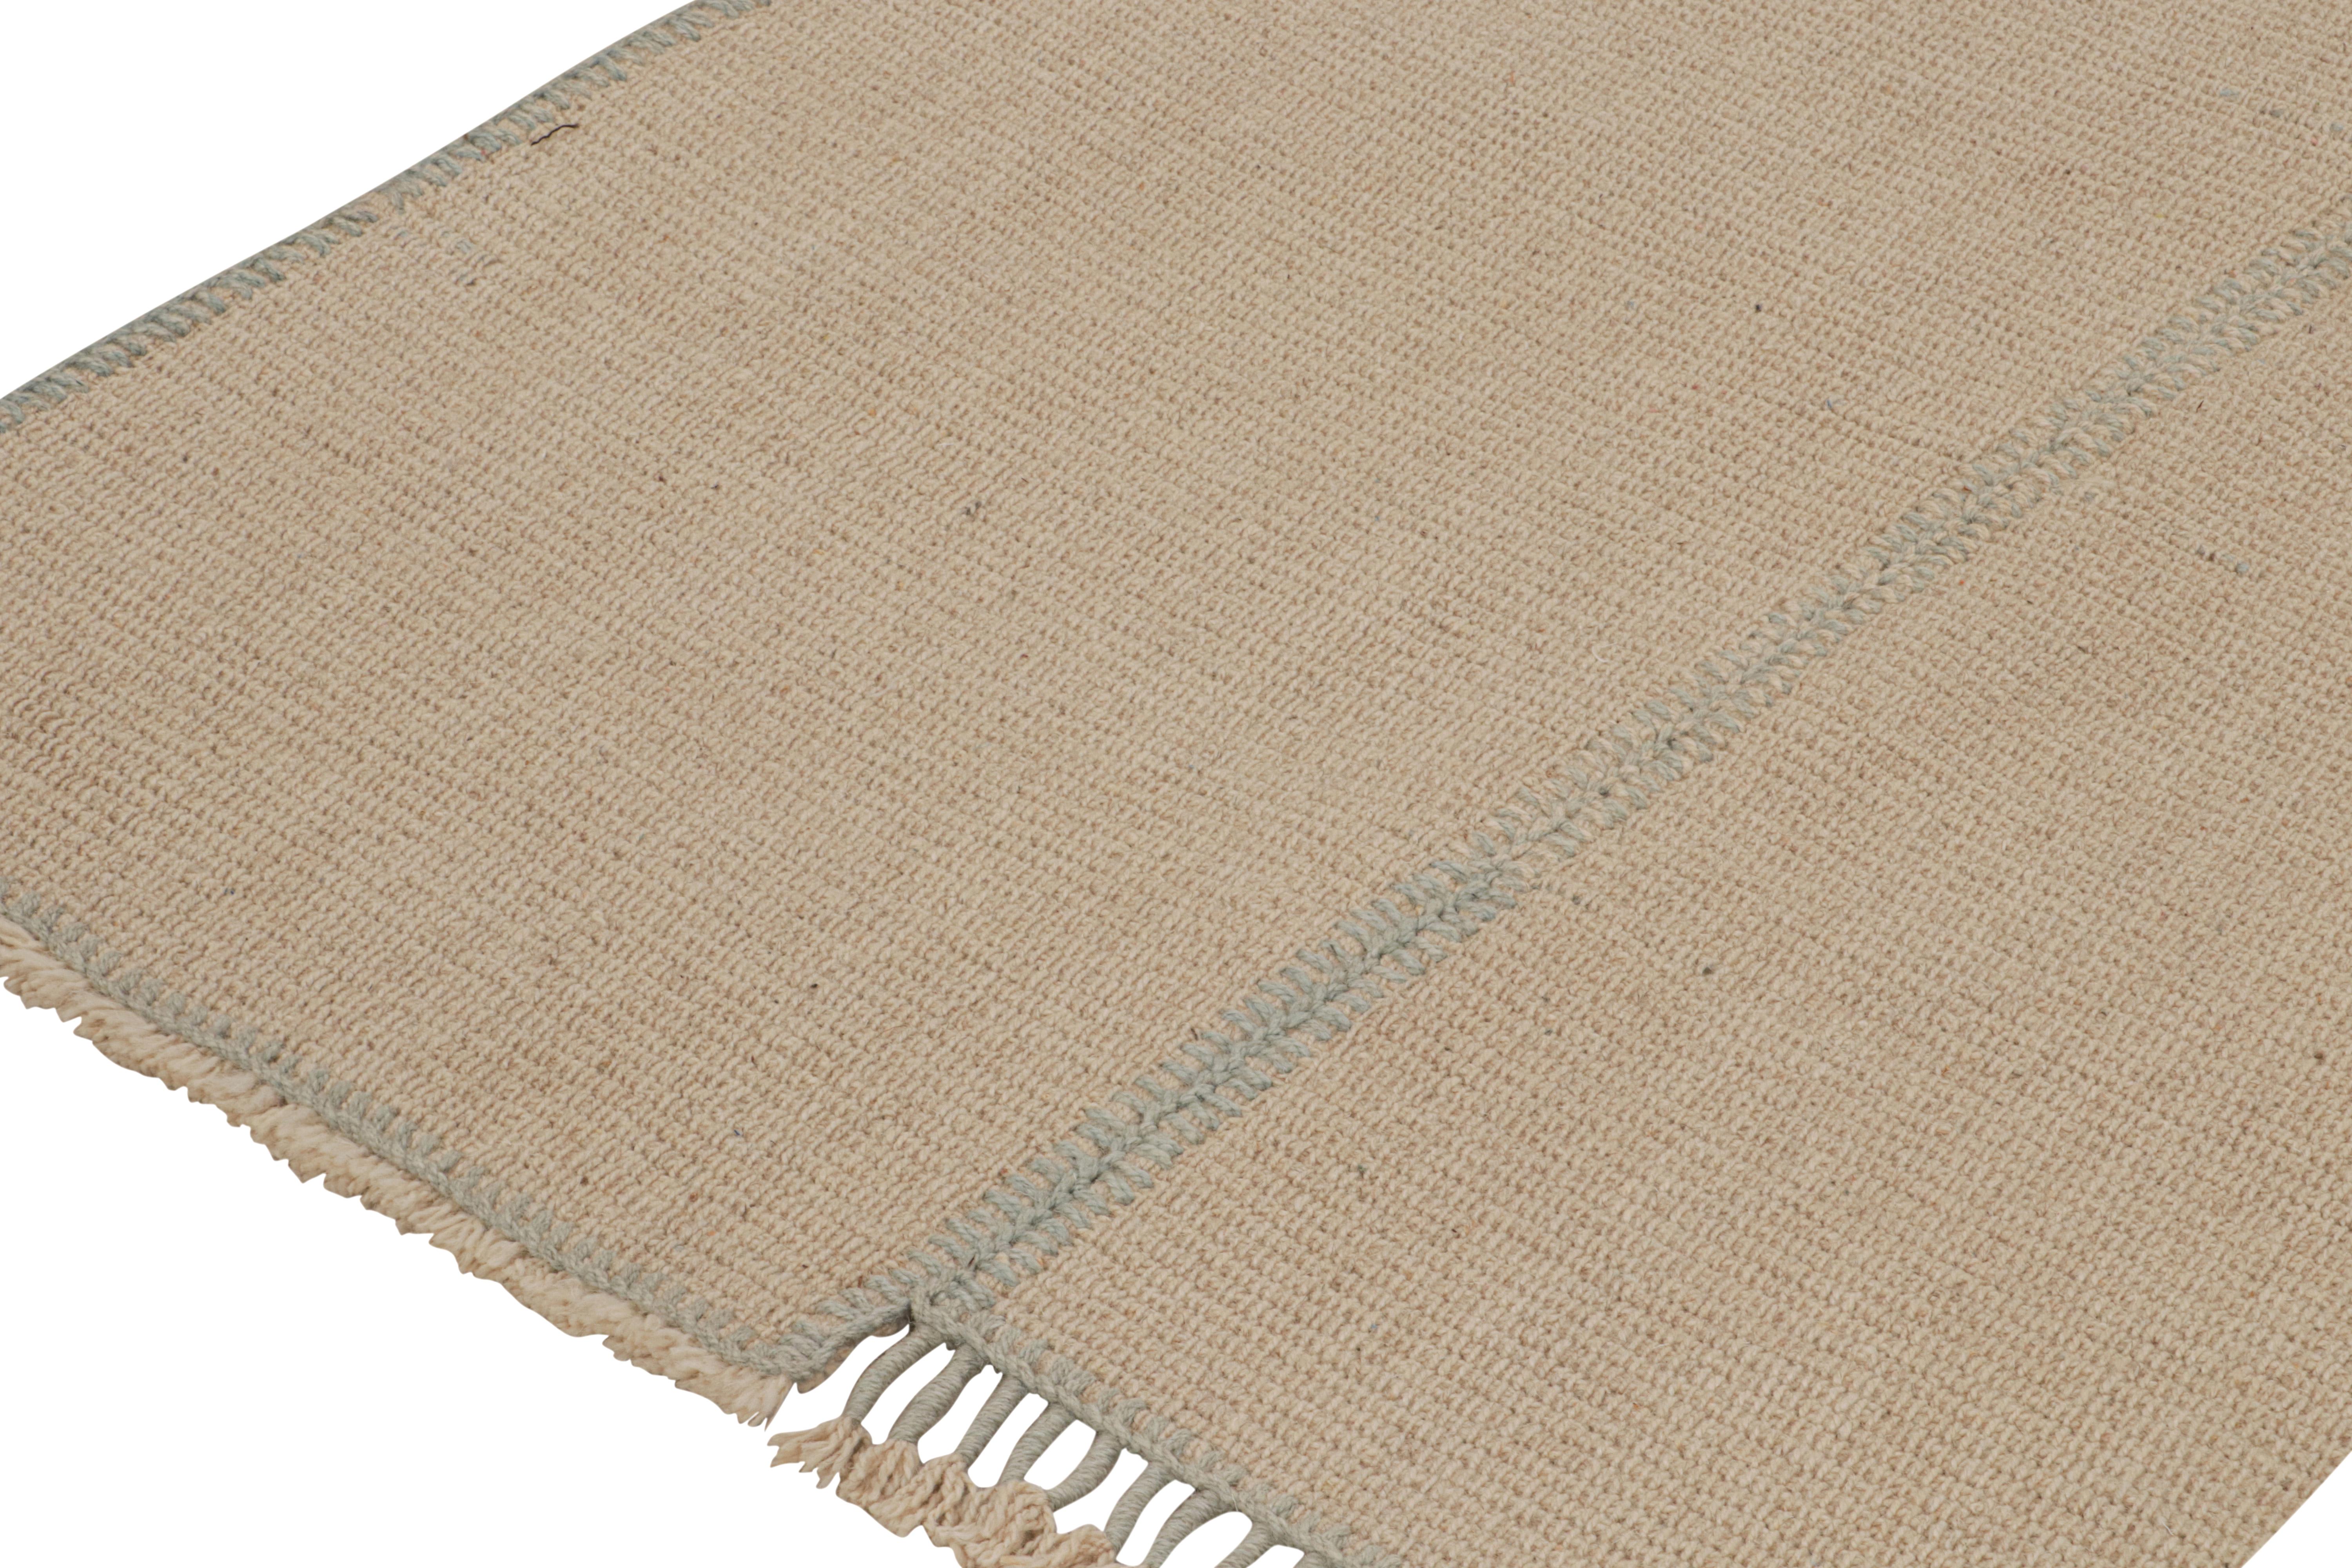 Hand-Knotted Rug & Kilim’s Contemporary Kilim in Beige, Blue Stripes and Off-White Accents For Sale